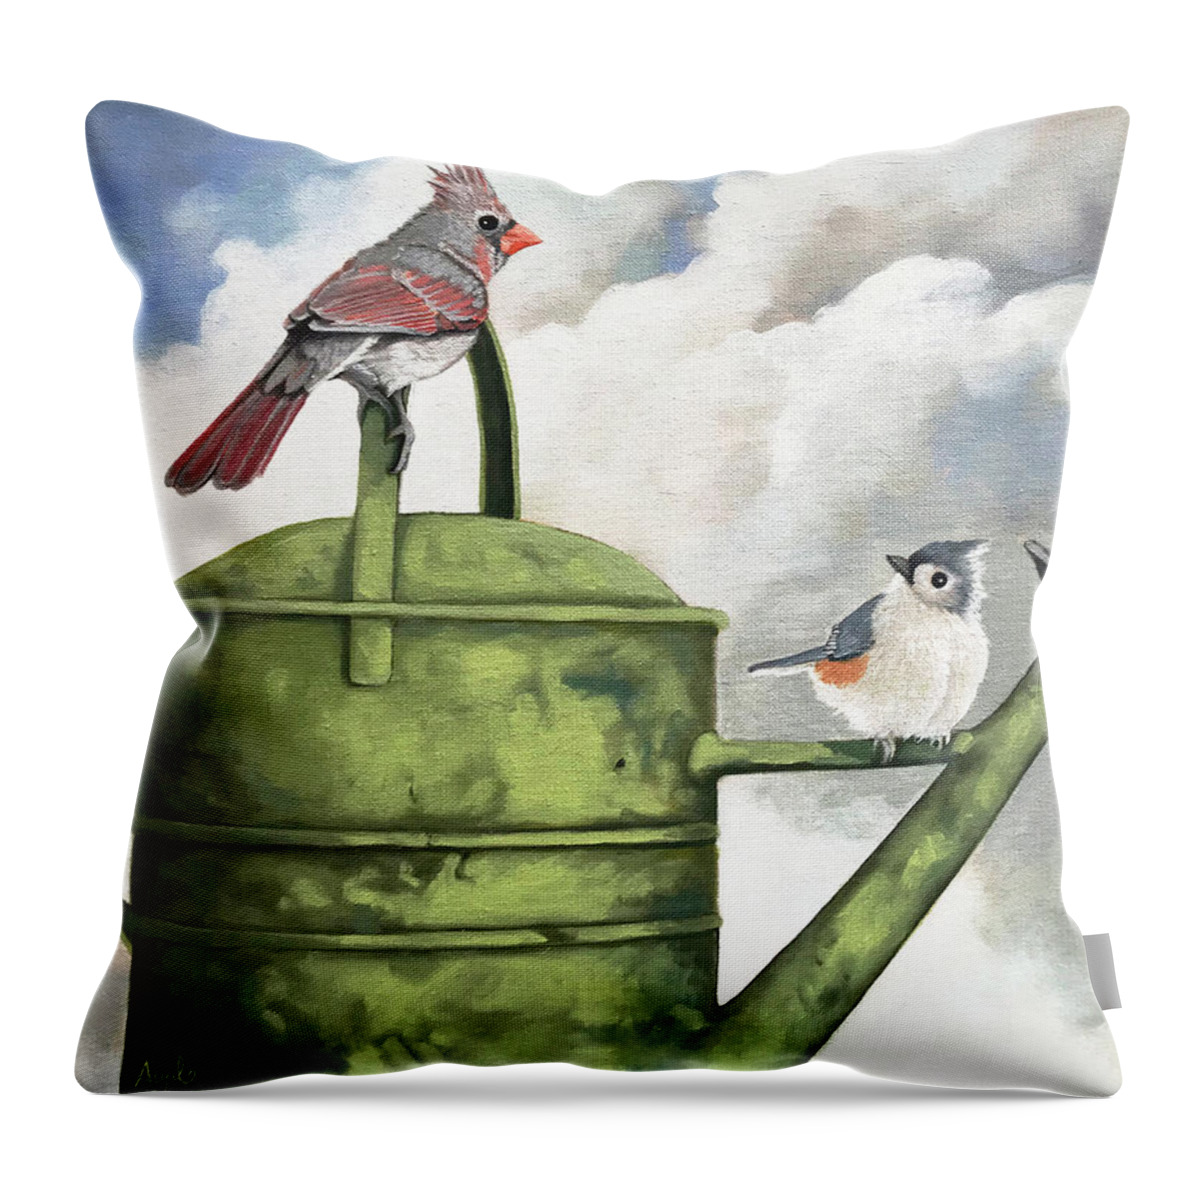 Birds Throw Pillow featuring the painting Sharing by Linda Apple